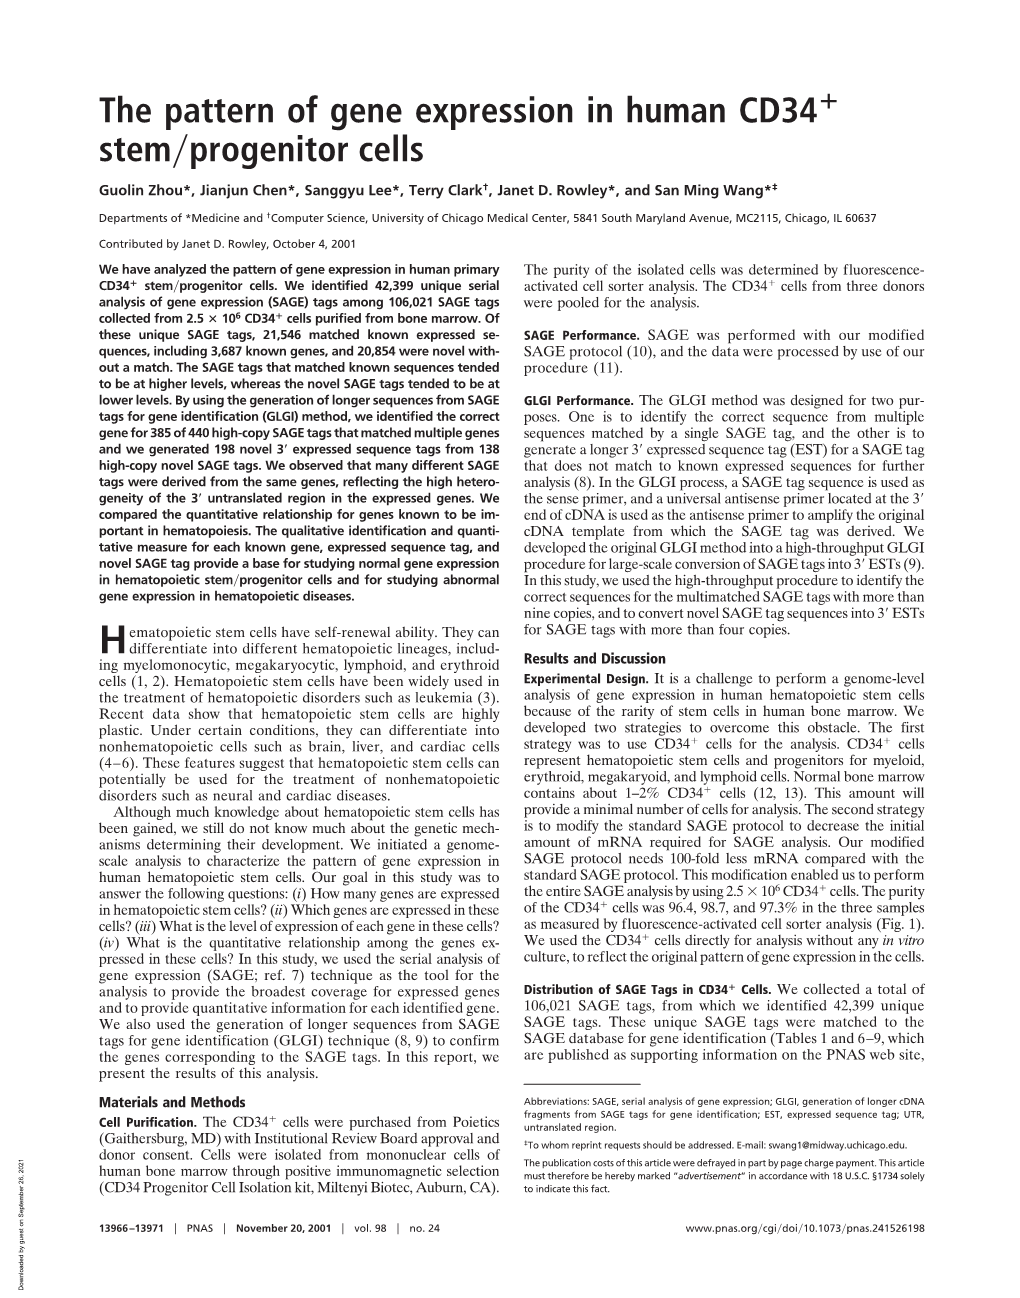 The Pattern of Gene Expression in Human CD34 Stem Progenitor Cells